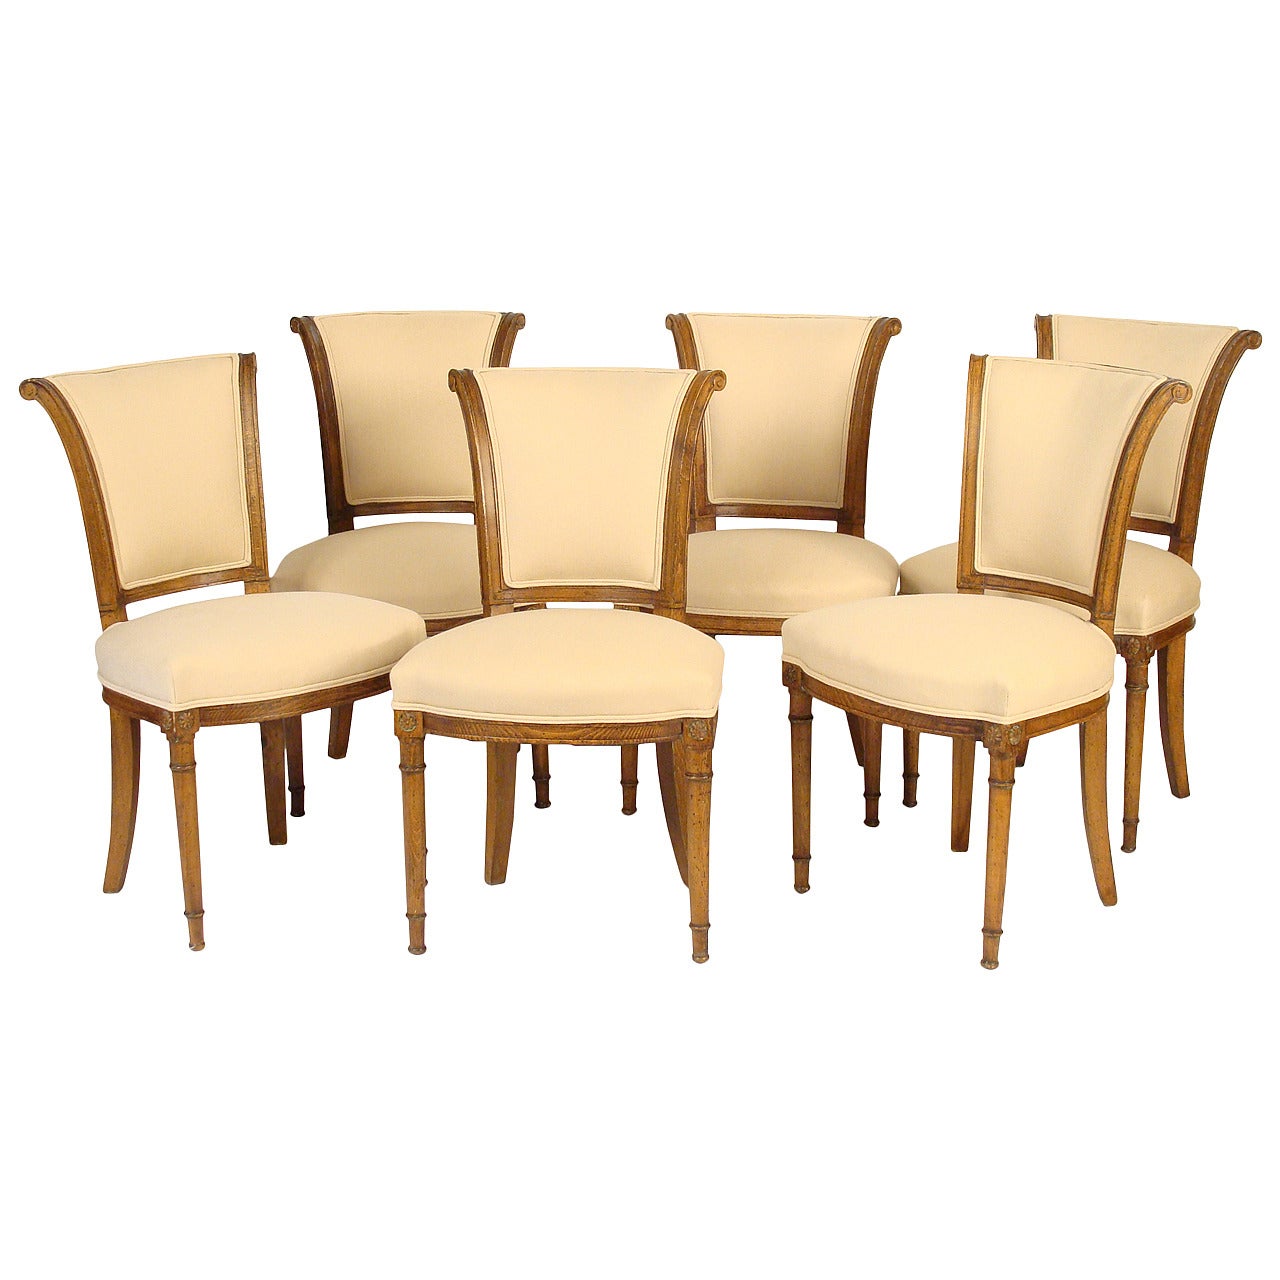 Set of Directoire Style Dining Room Chairs